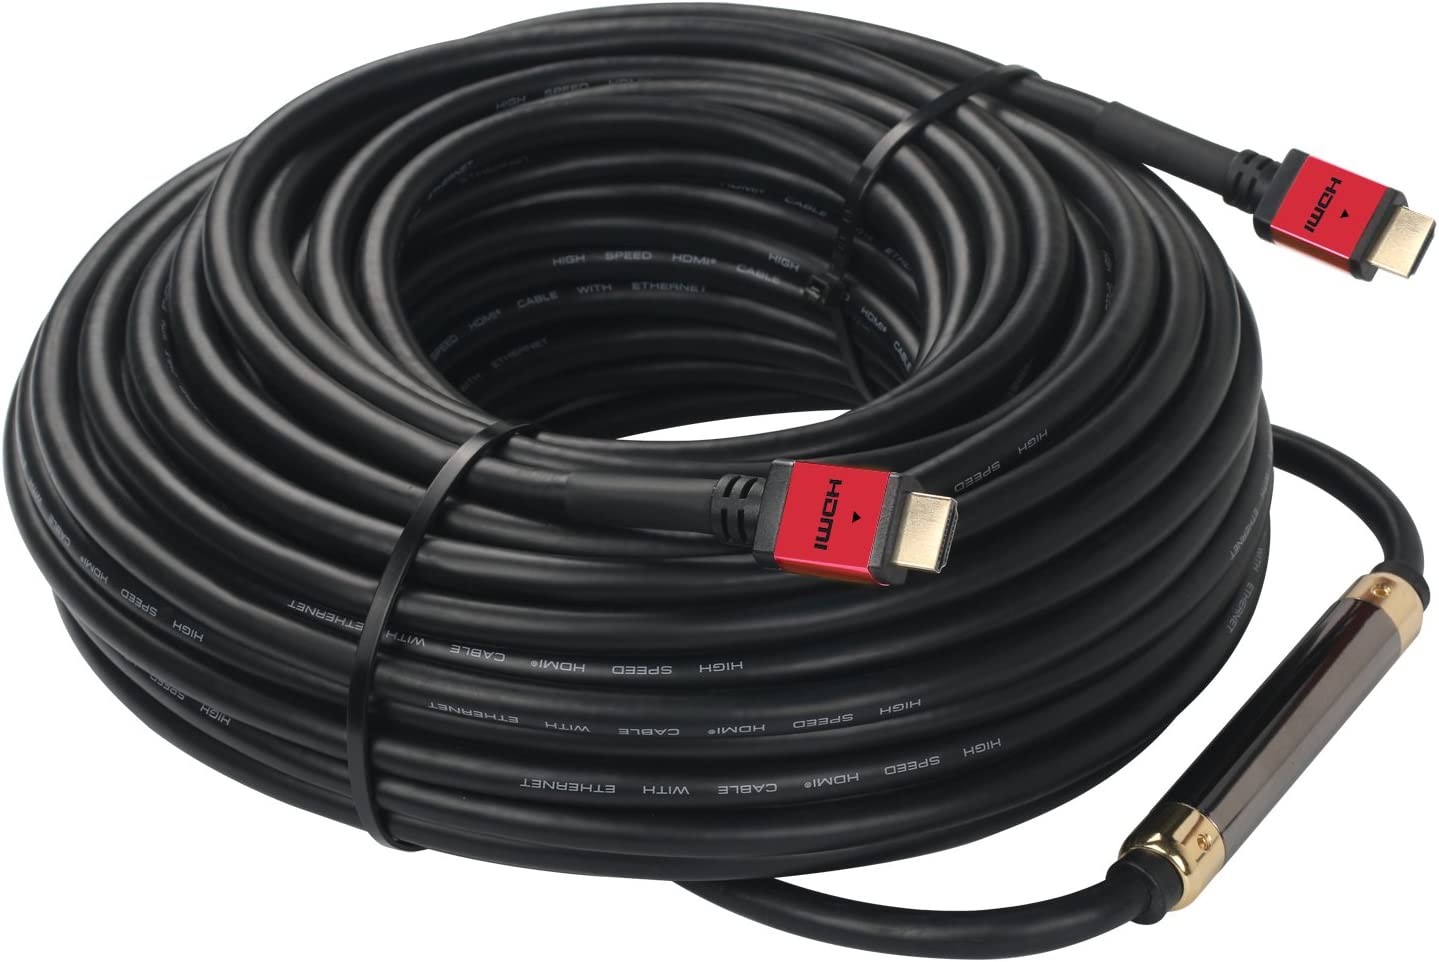  7. SHD 100 Feet HDMI Cable with Signal Booster 